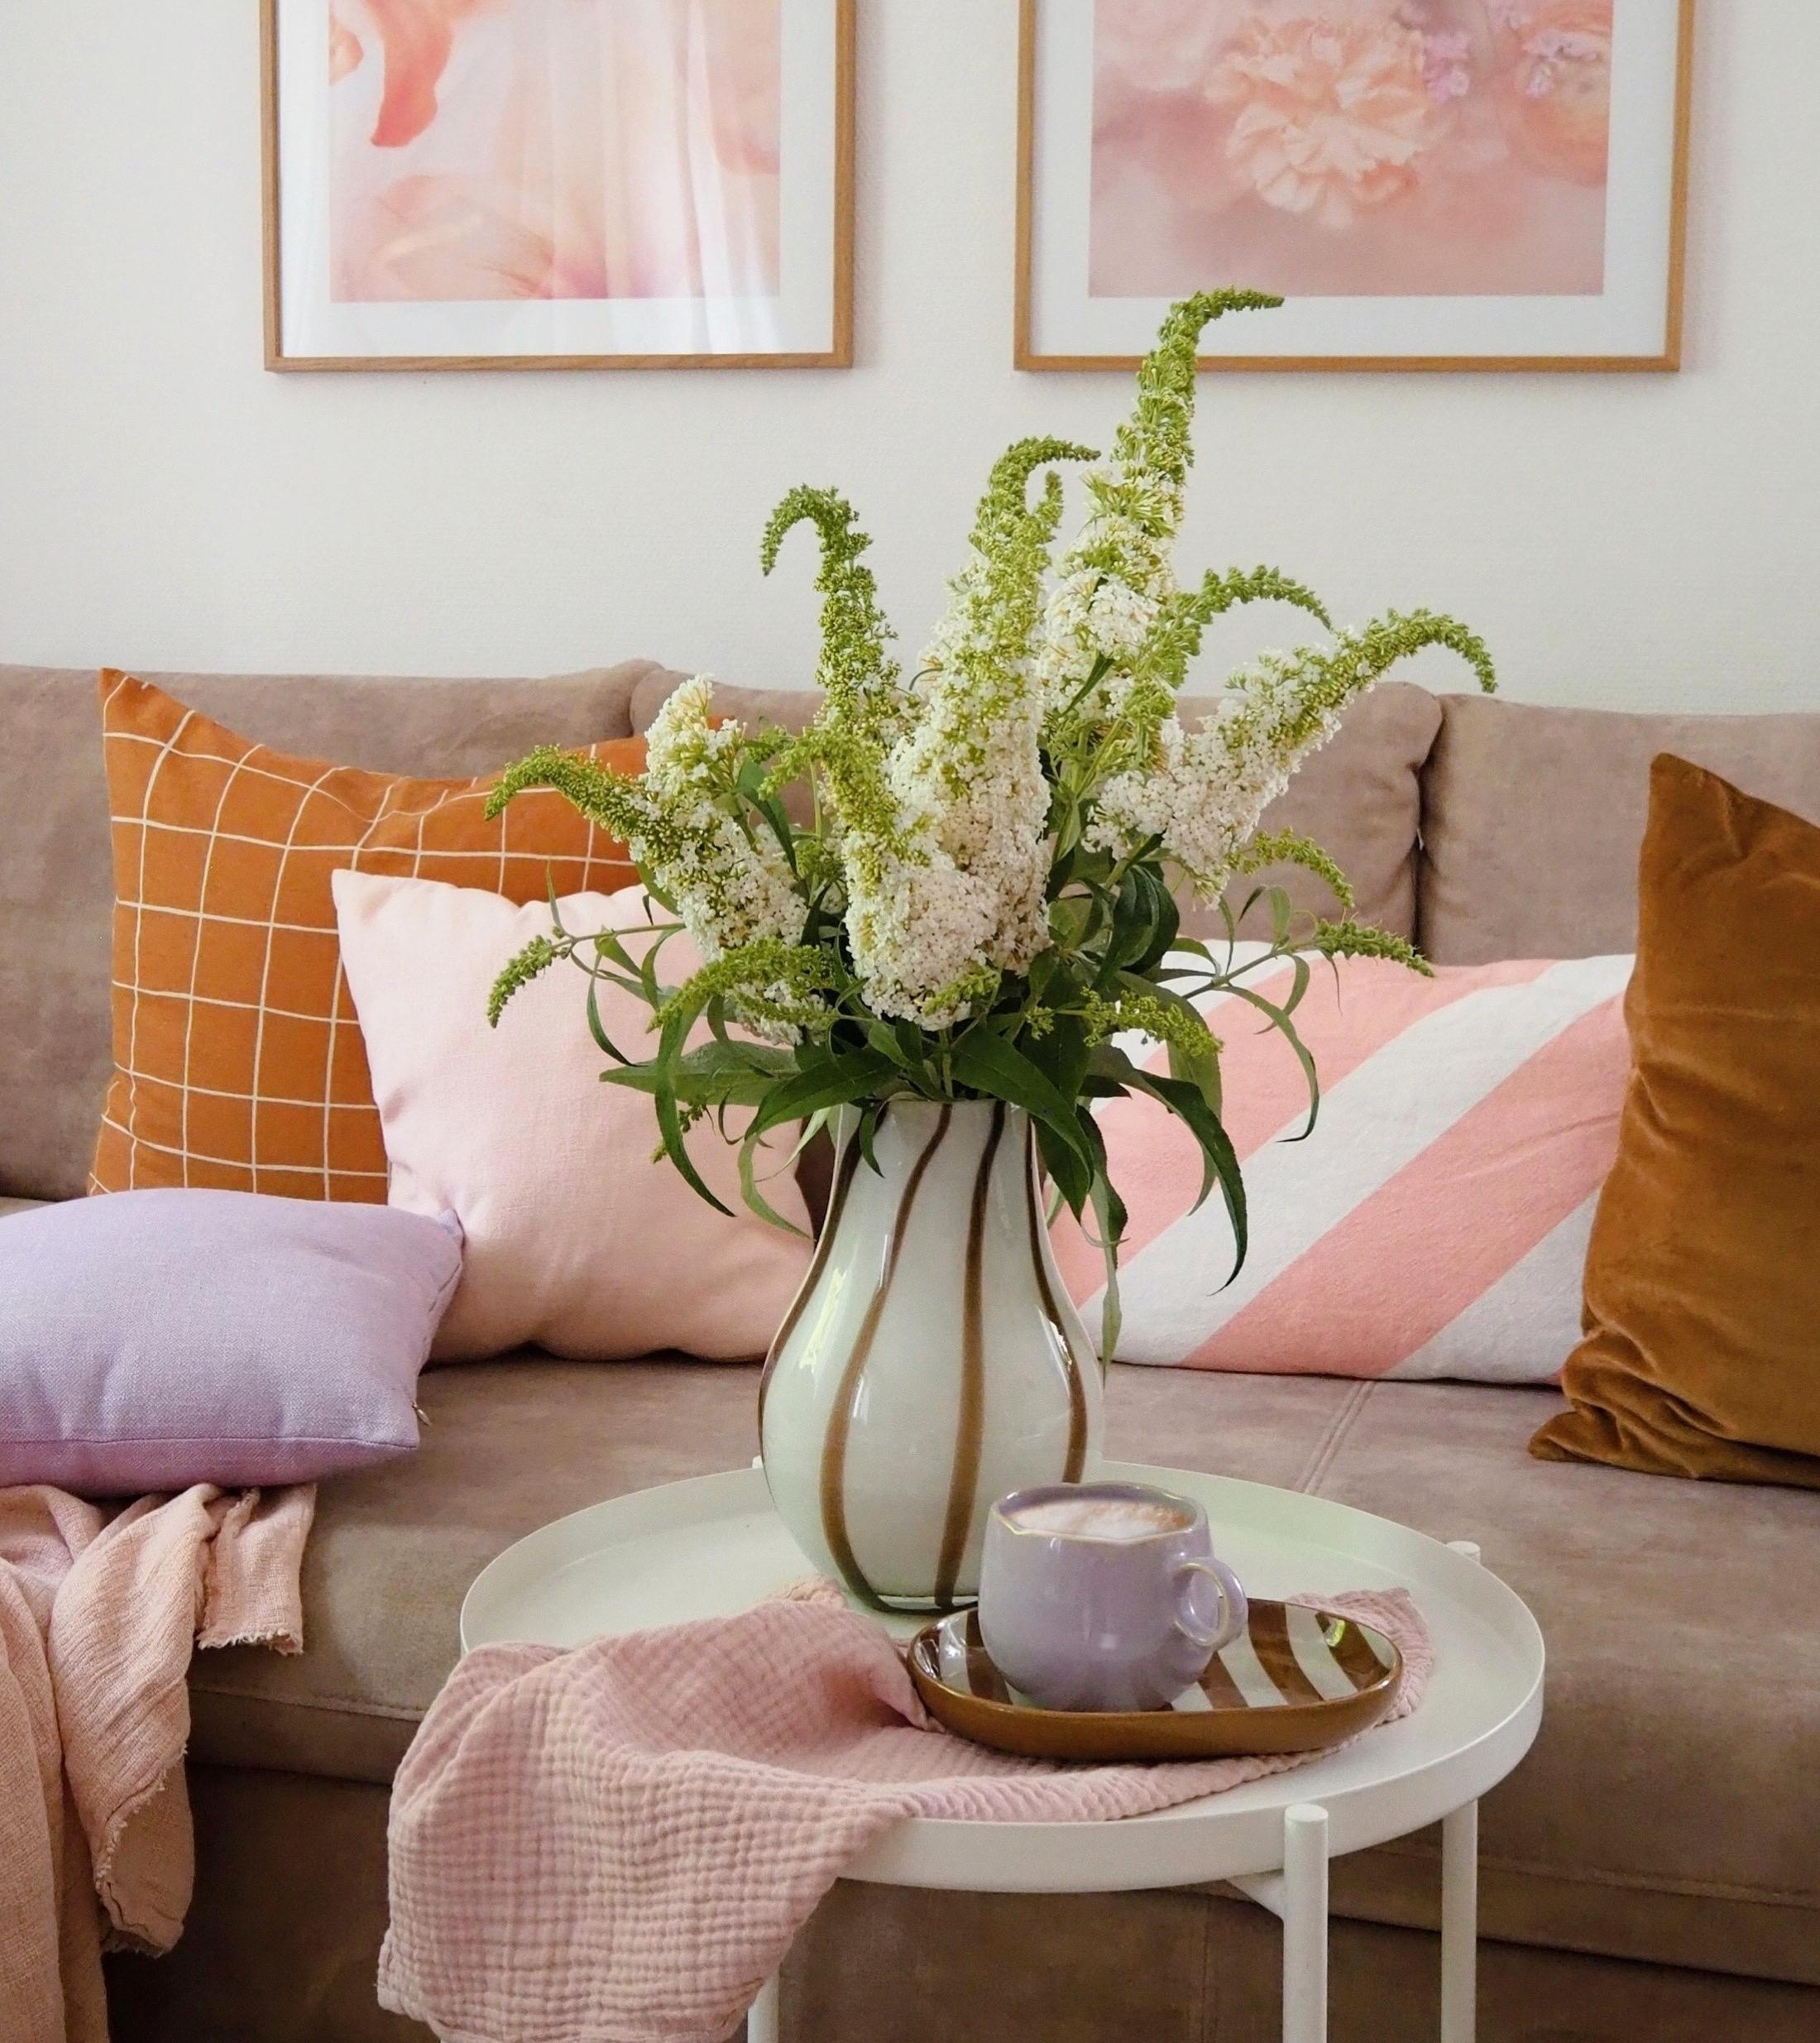 FRIDAY #flowers 
#couchstyle #couch #wohnzimmer #colourfulhome #livingroominspo #blumenliebe